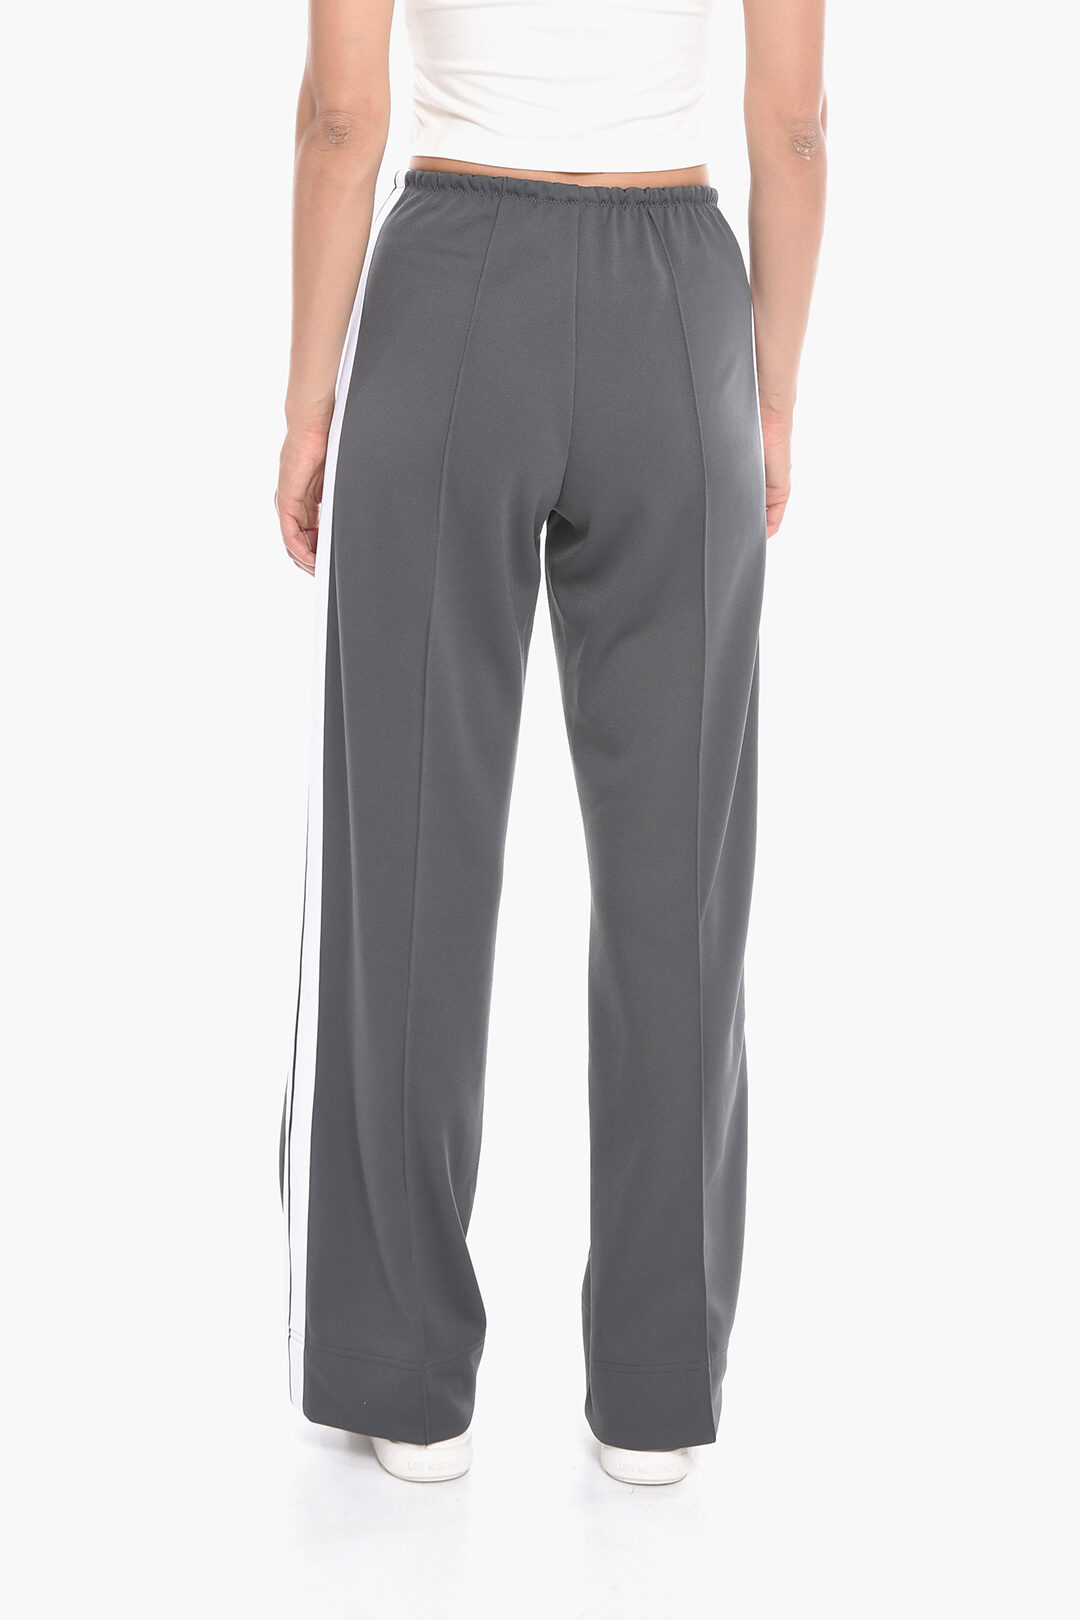 https://data.glamood.com/imgprodotto/wide-leg-joggers-with-contrasting-bands_1378469_zoom.jpg